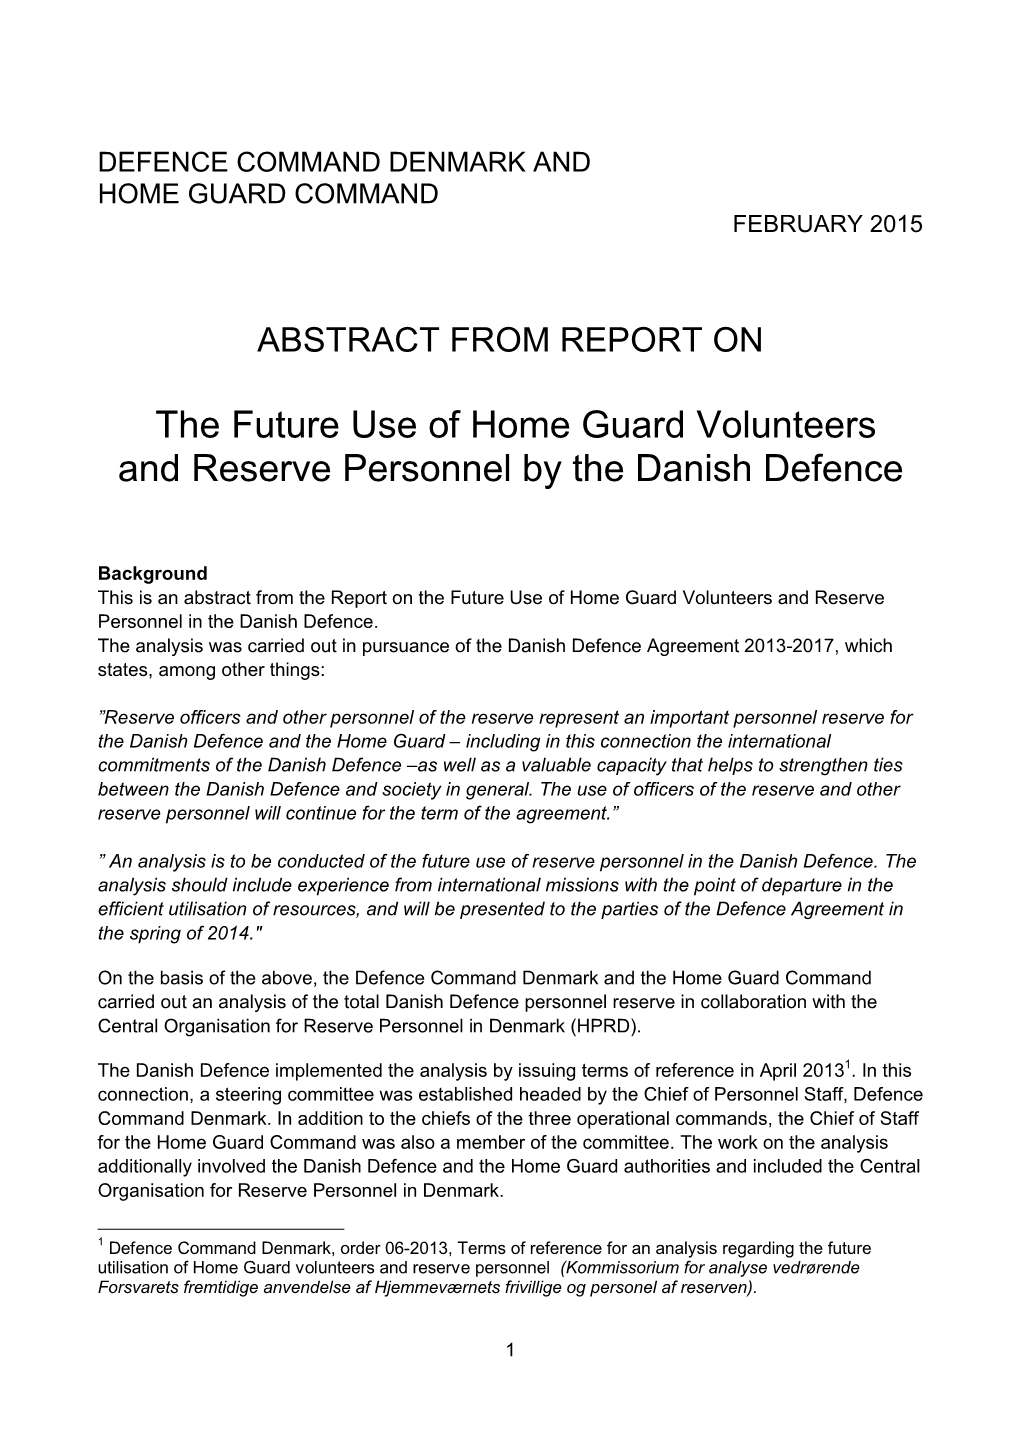 The Future Use of Home Guard Volunteers and Reserve Personnel by the Danish Defence